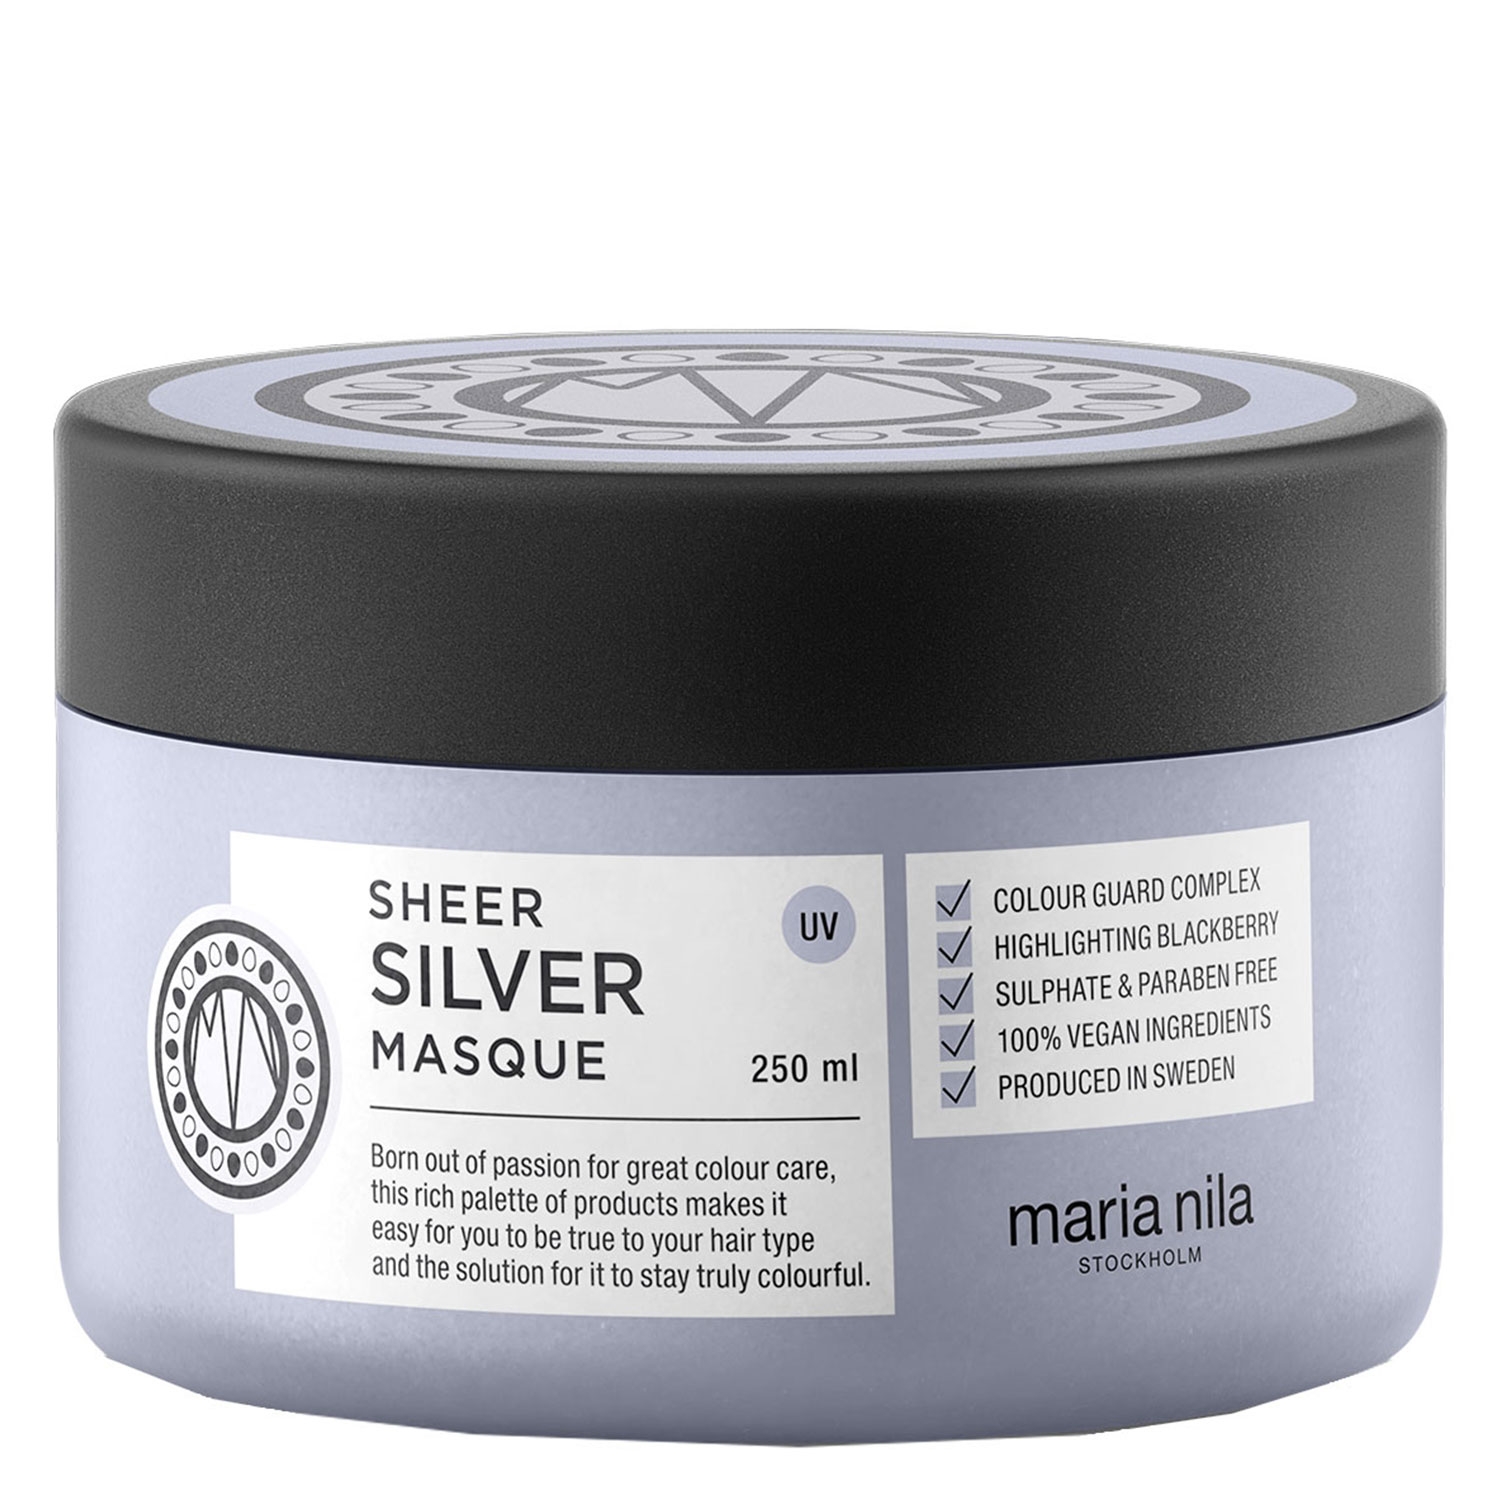 Product image from Care & Style - Sheer Silver Masque